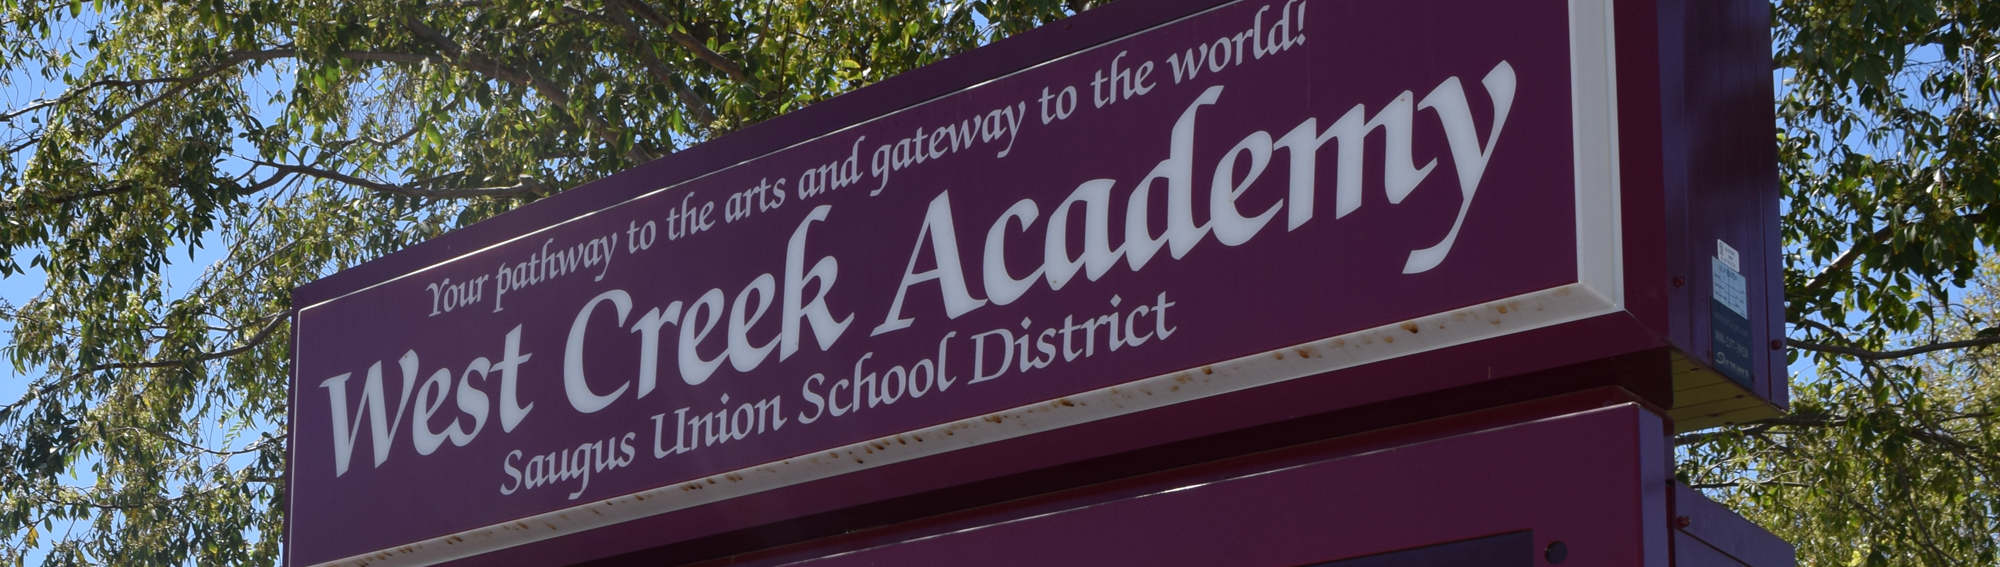 sign that reads-Your pathway to the arts and gateway to the world! West Creek Academy Saugus Union School District